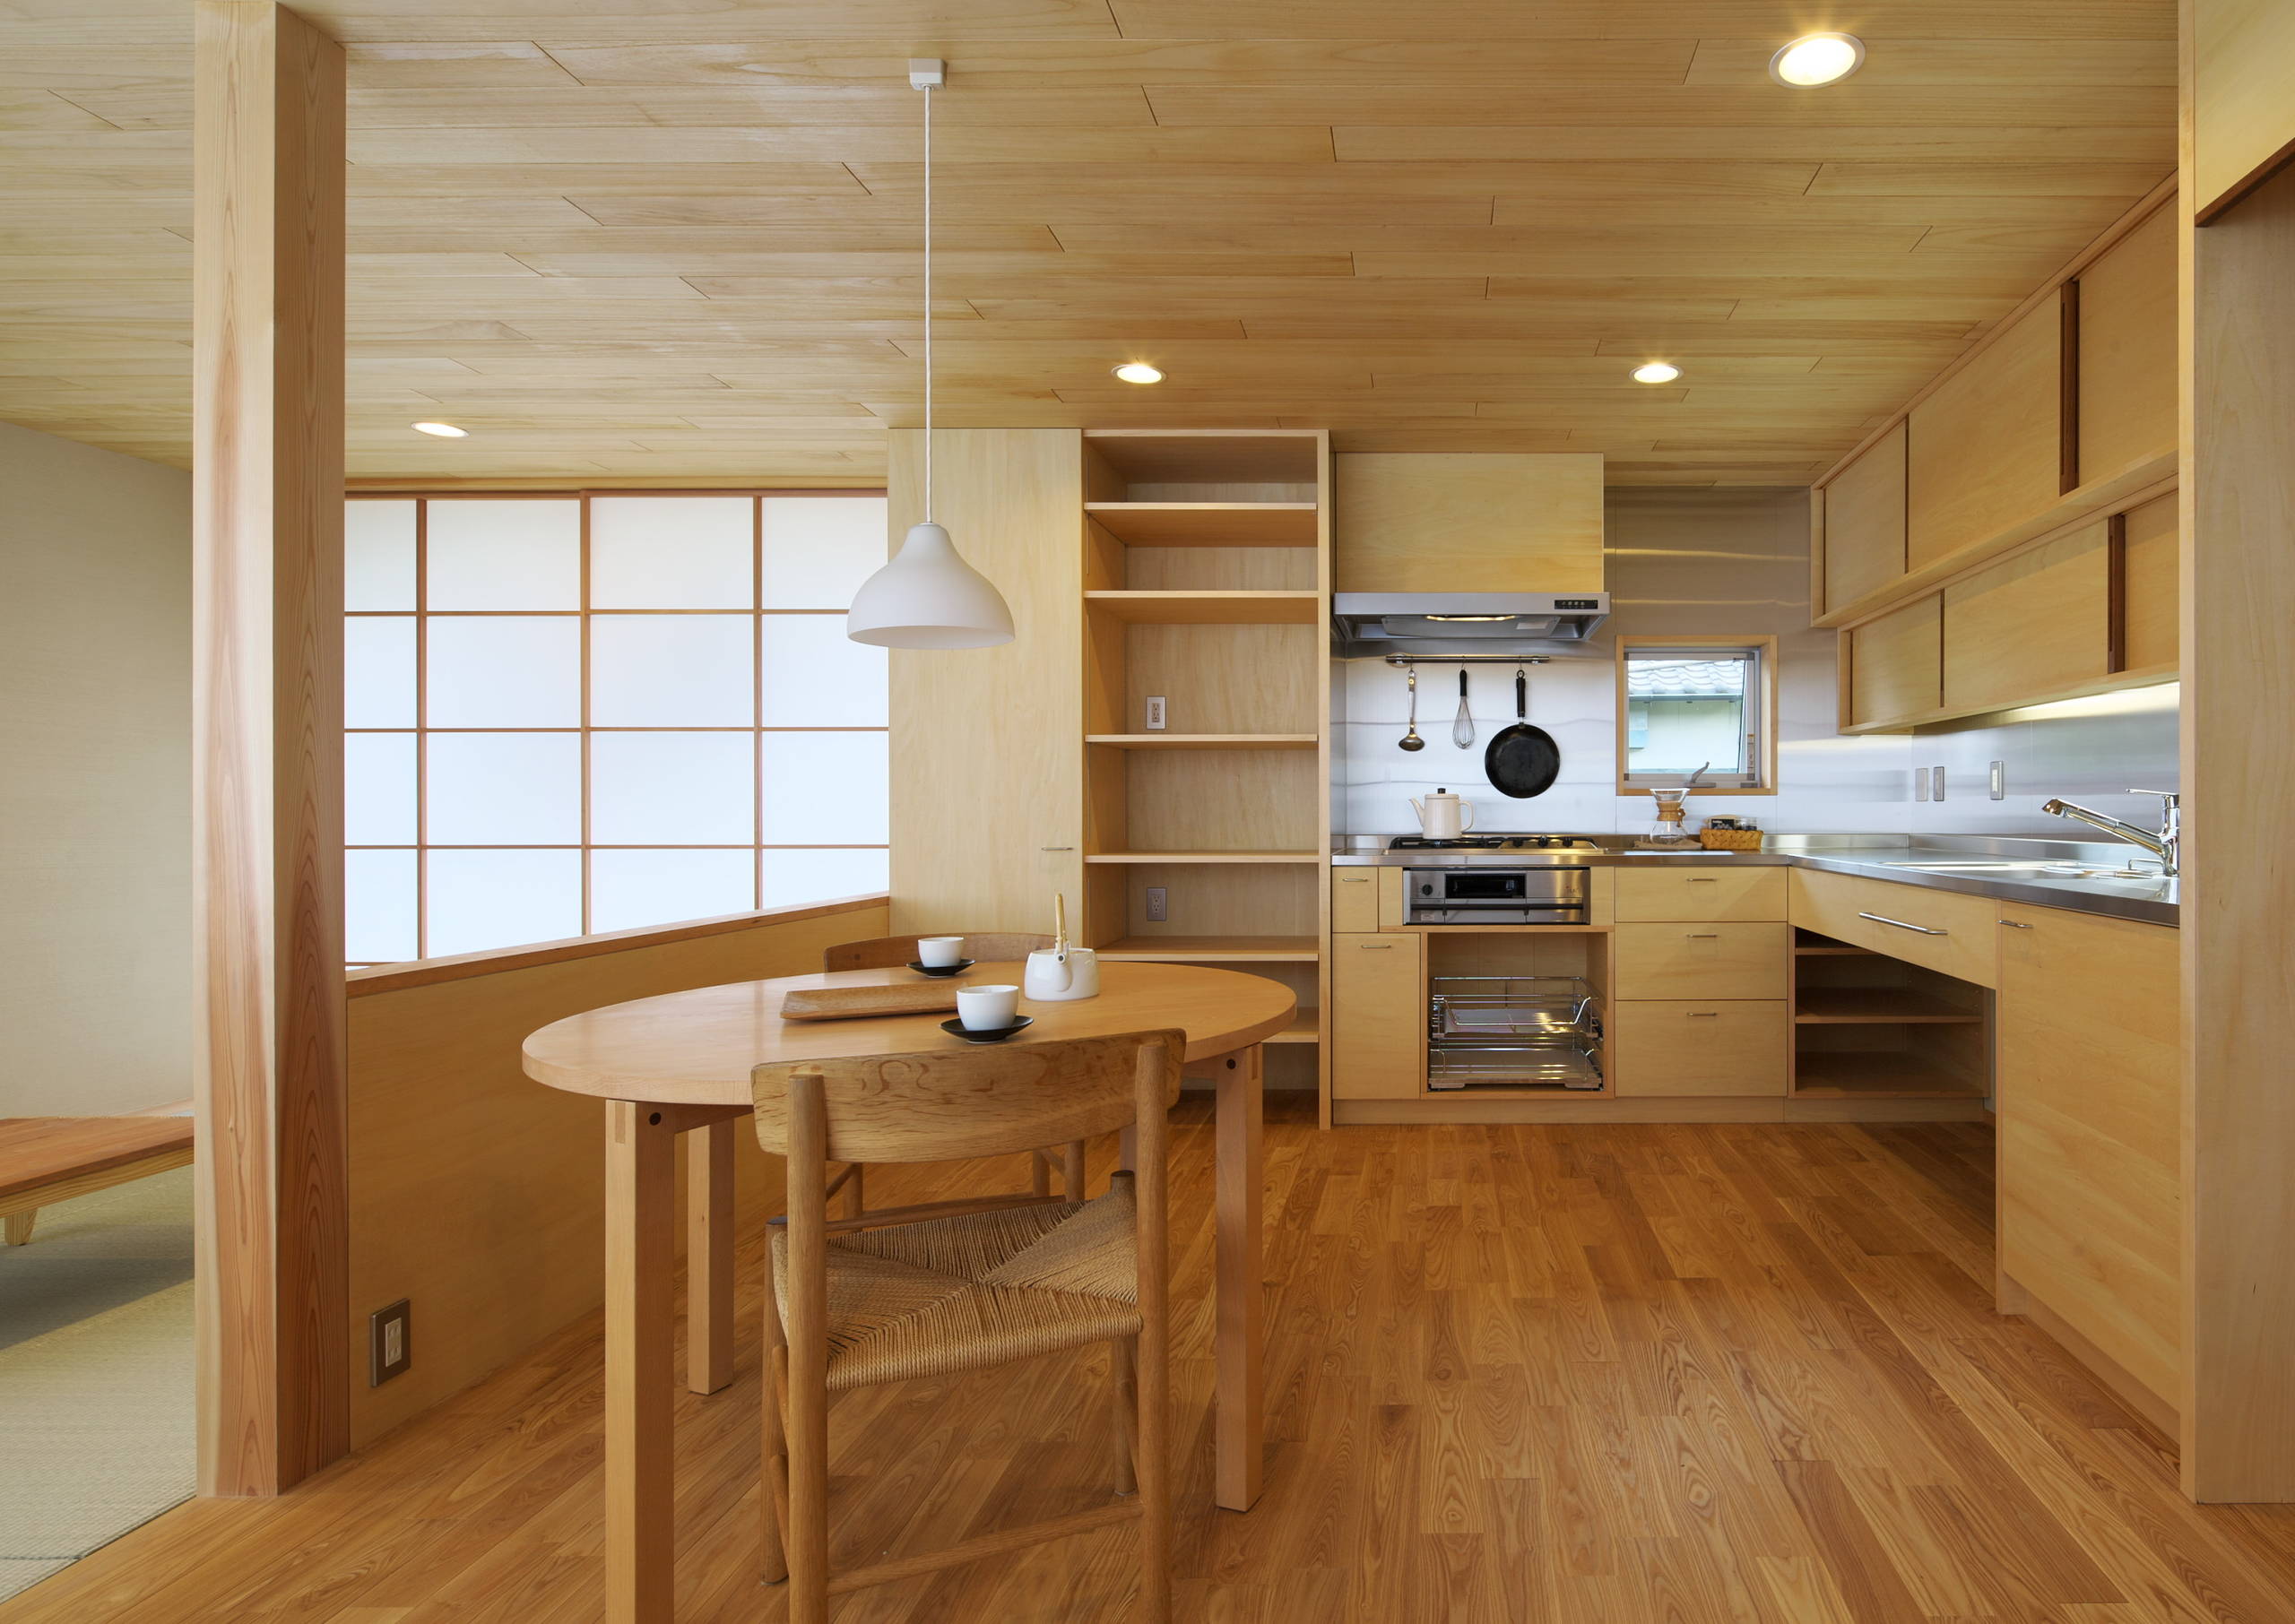 75 Asian Kitchen With Soapstone Countertops Ideas You Ll Love August 22 Houzz